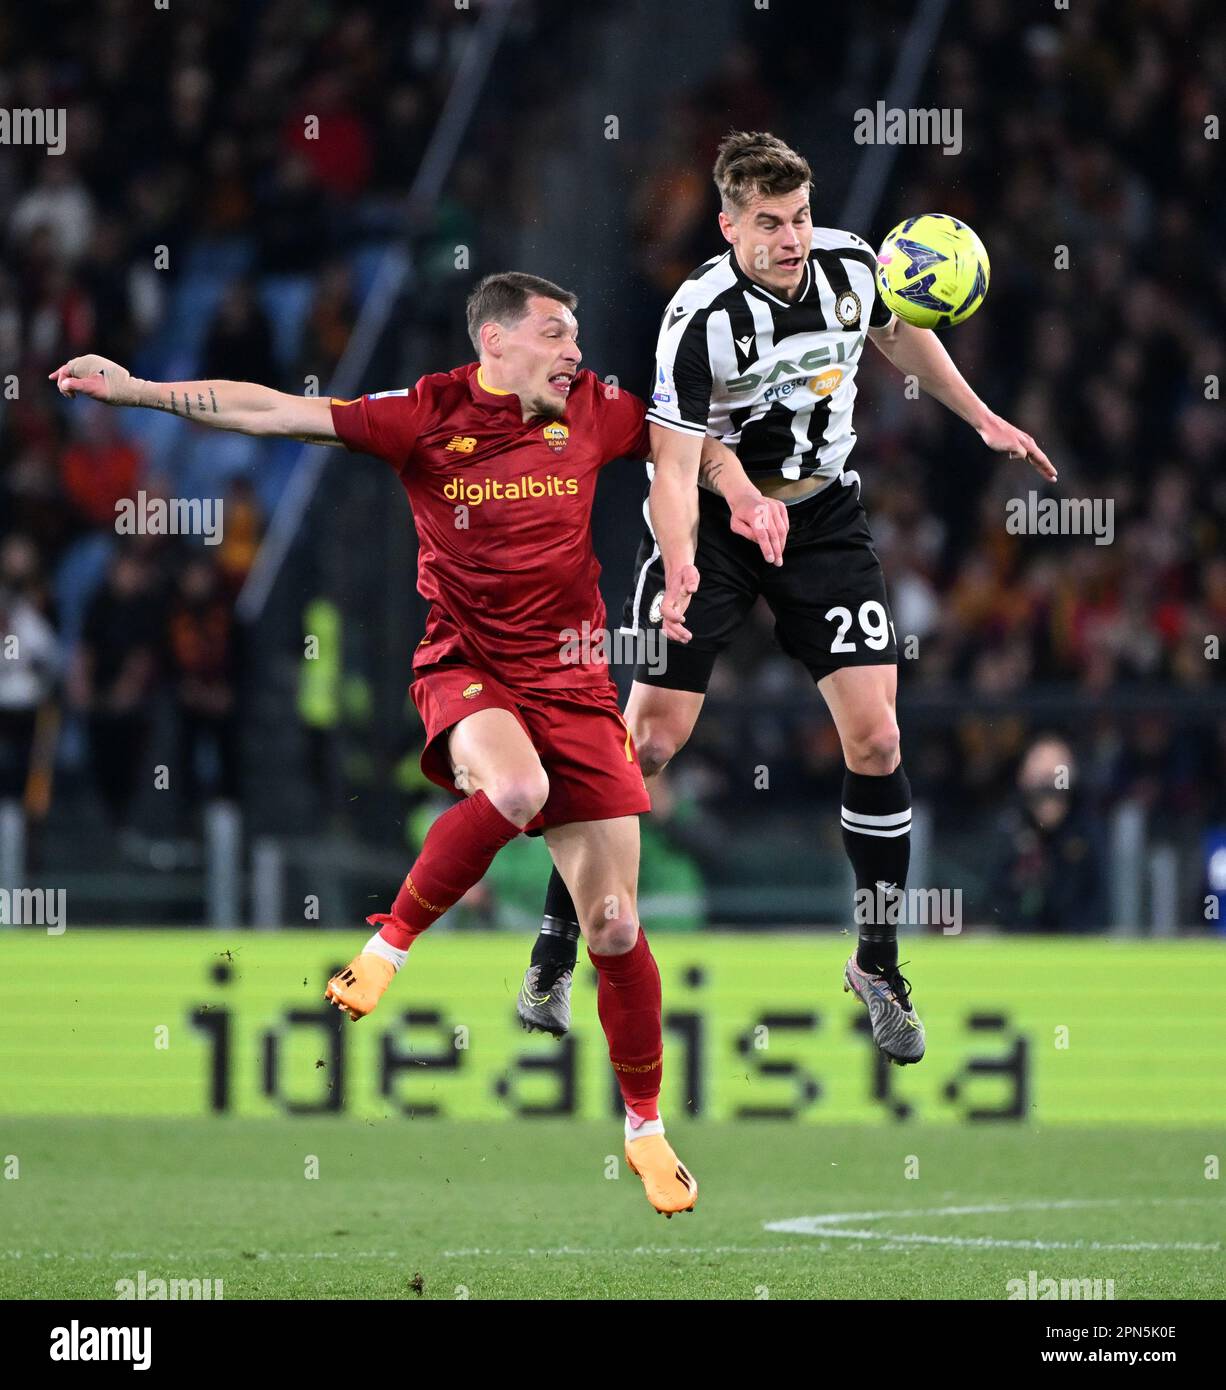 Rome, Italy. 16th Apr, 2023. Roma's Andrea Belotti (L) vies with Udinese's Jaka Bijol during a Serie A football match between Roma and Udinese in Rome, Italy, on April 16, 2023. Credit: Alberto Lingria/Xinhua/Alamy Live News Stock Photo